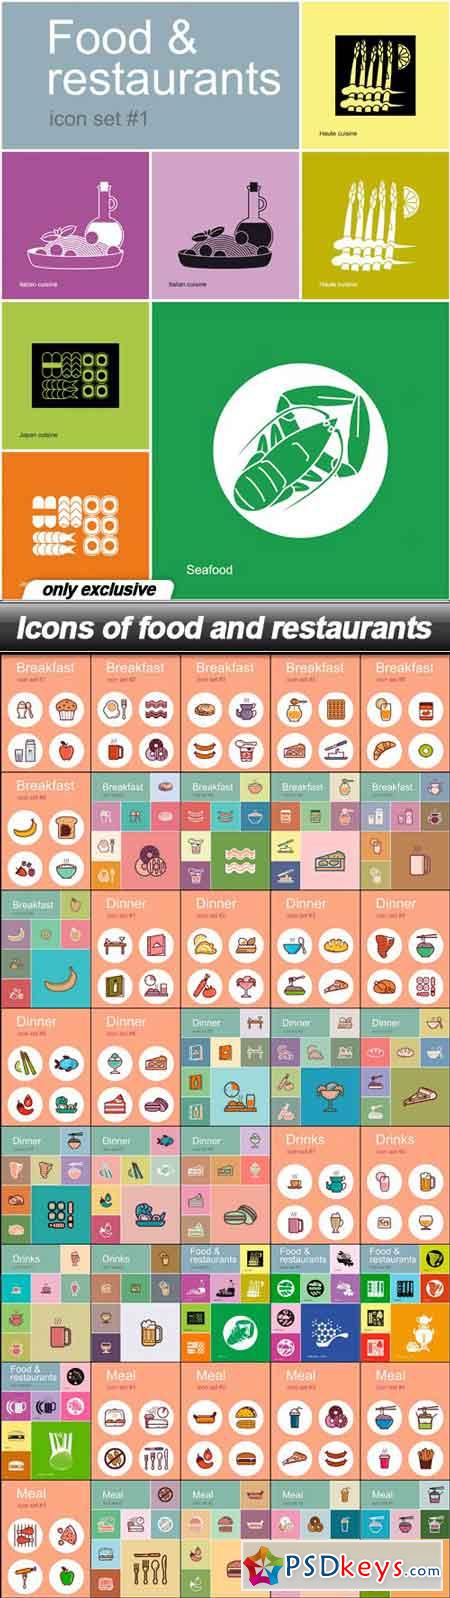 Icons of food and restaurants - 40 EPS